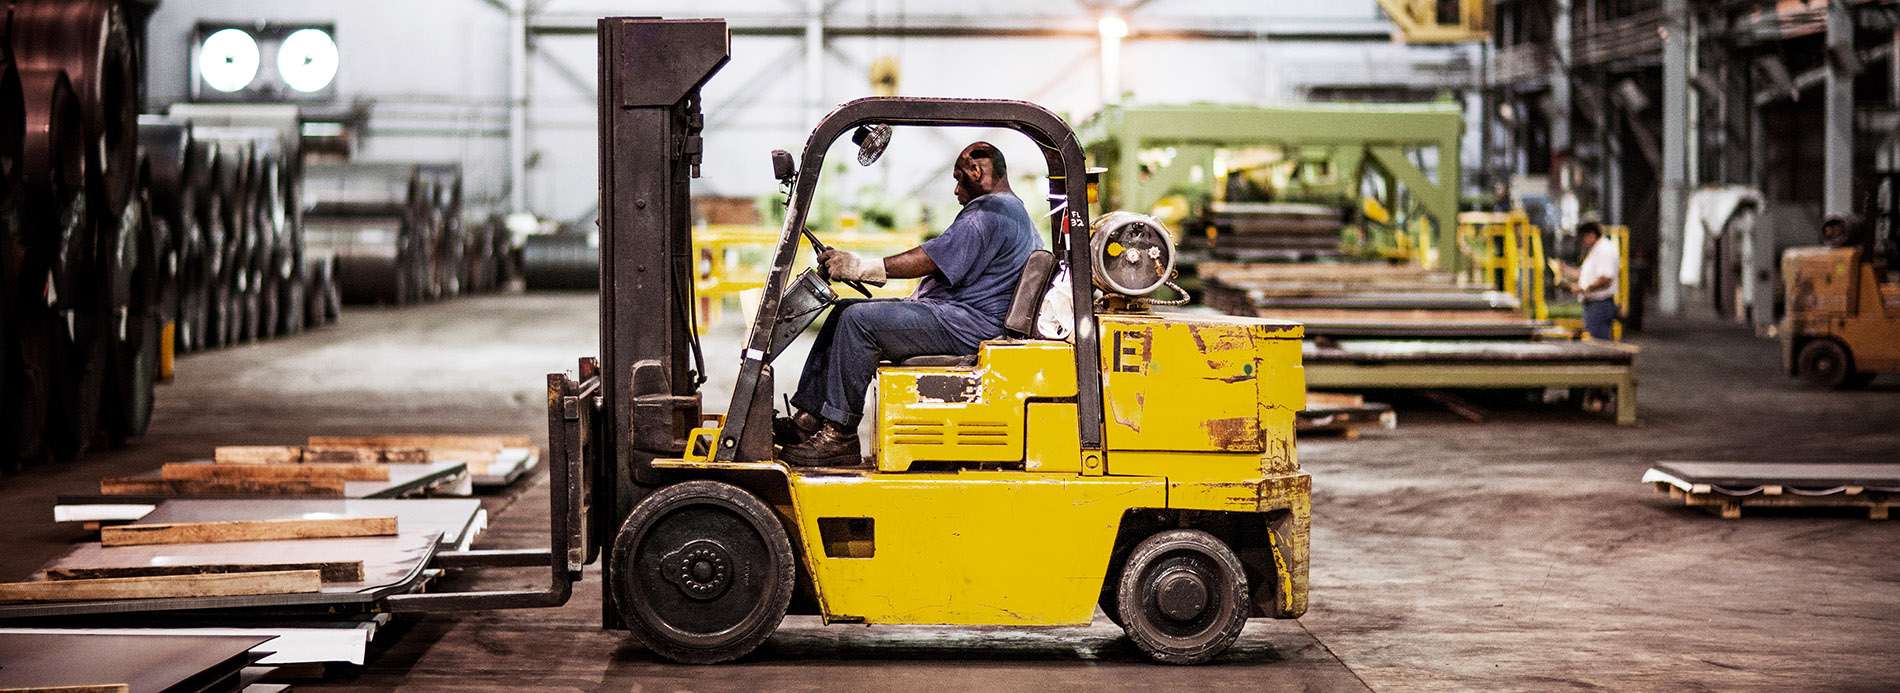 man operating a forklift